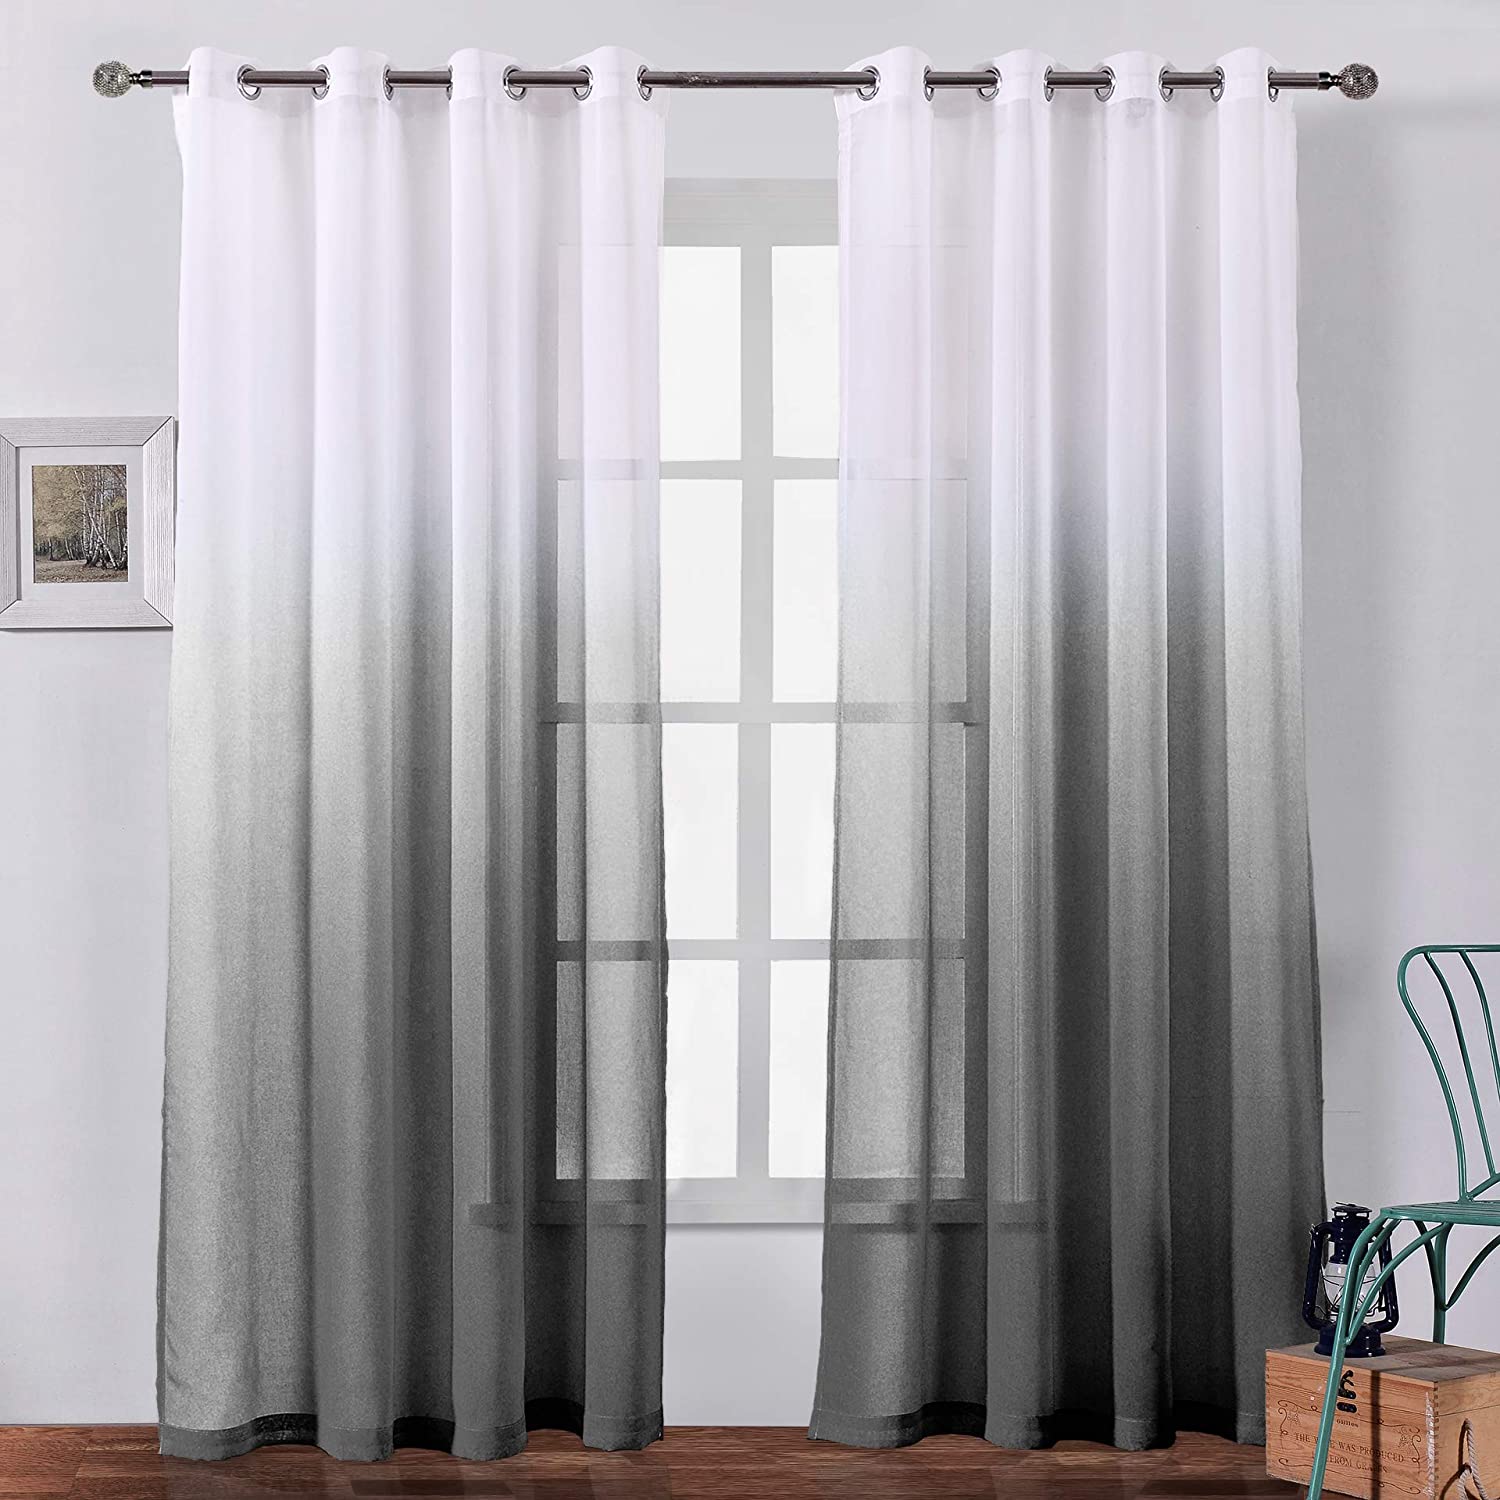 Bermino Faux Linen Ombre Sheer Curtains Voile Grommet Semi Sheer Curtains for Be